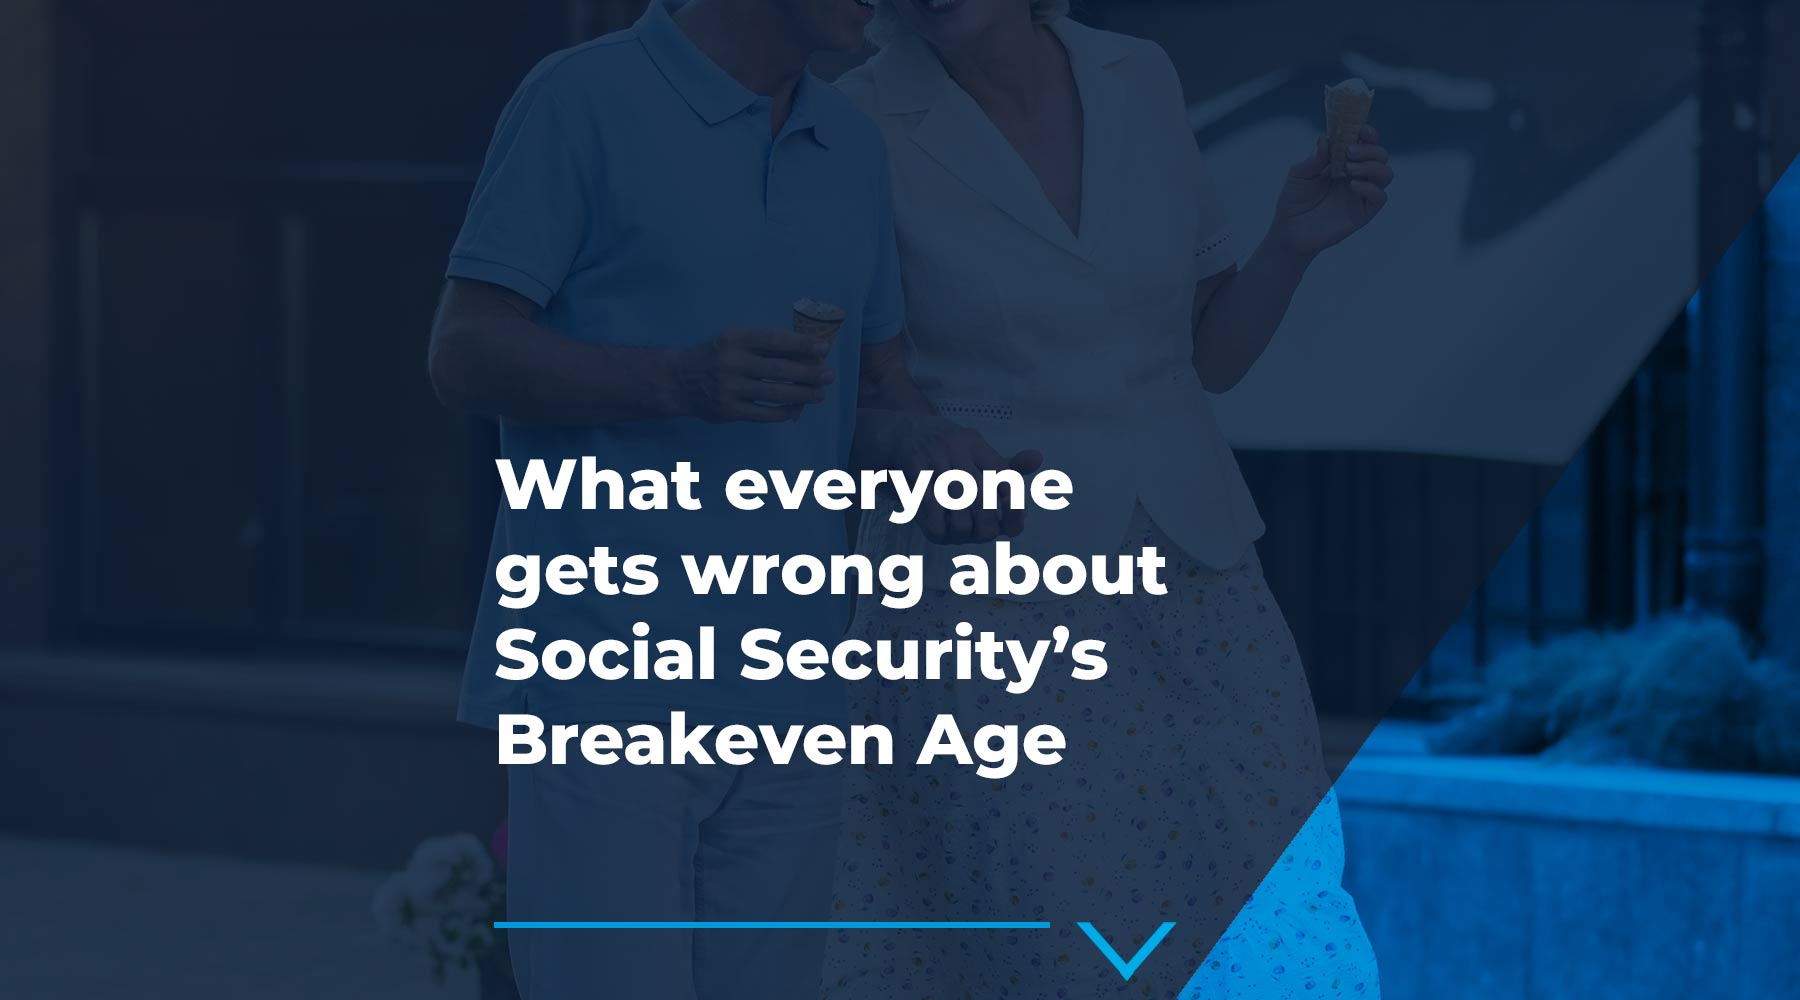 What everyone gets wrong about Social Security’s Breakeven Age